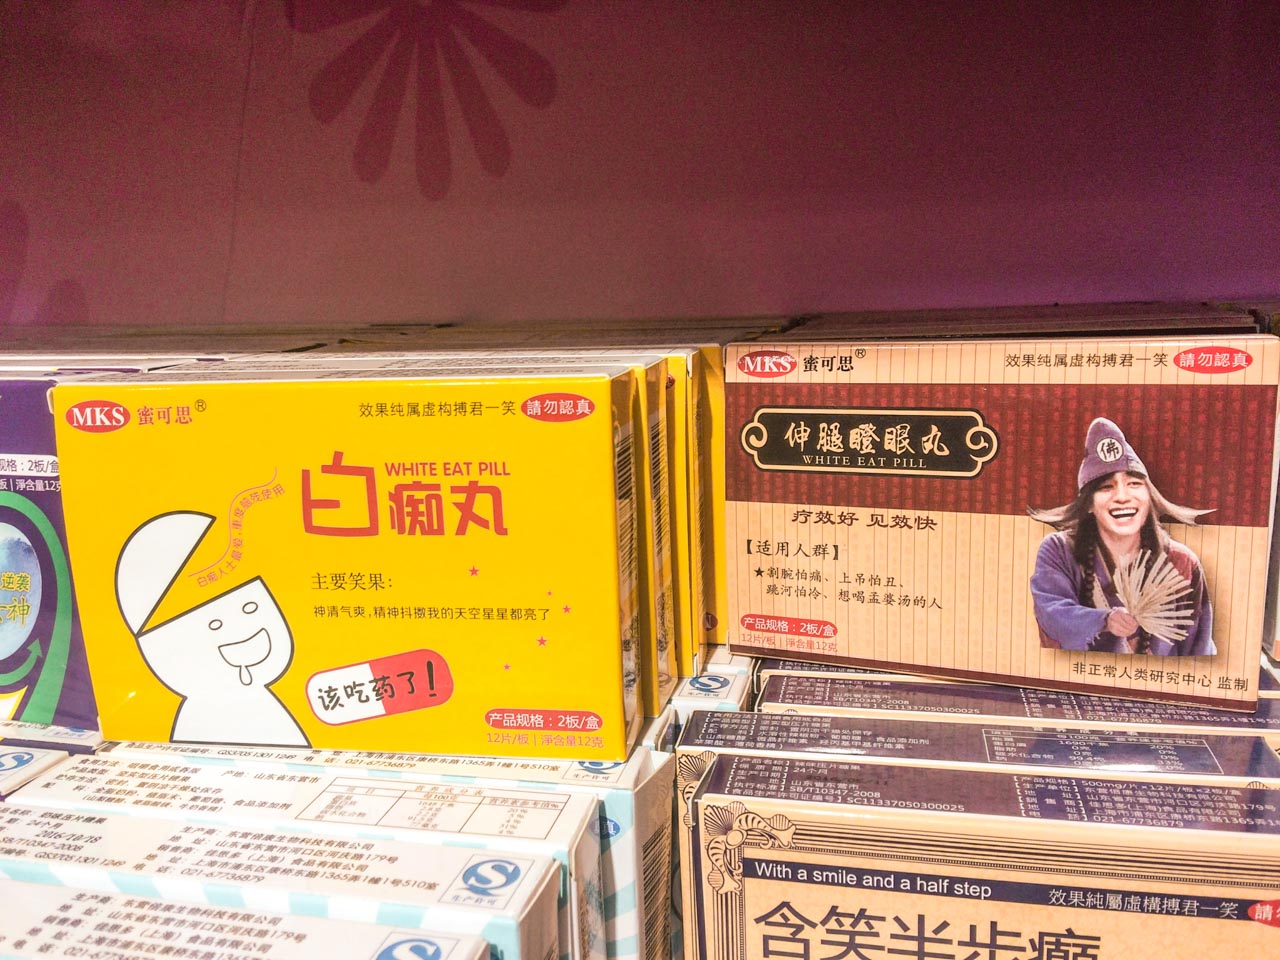 Rows of packs with "white eat pill" written on them at a souvenir shop in Beijing, China